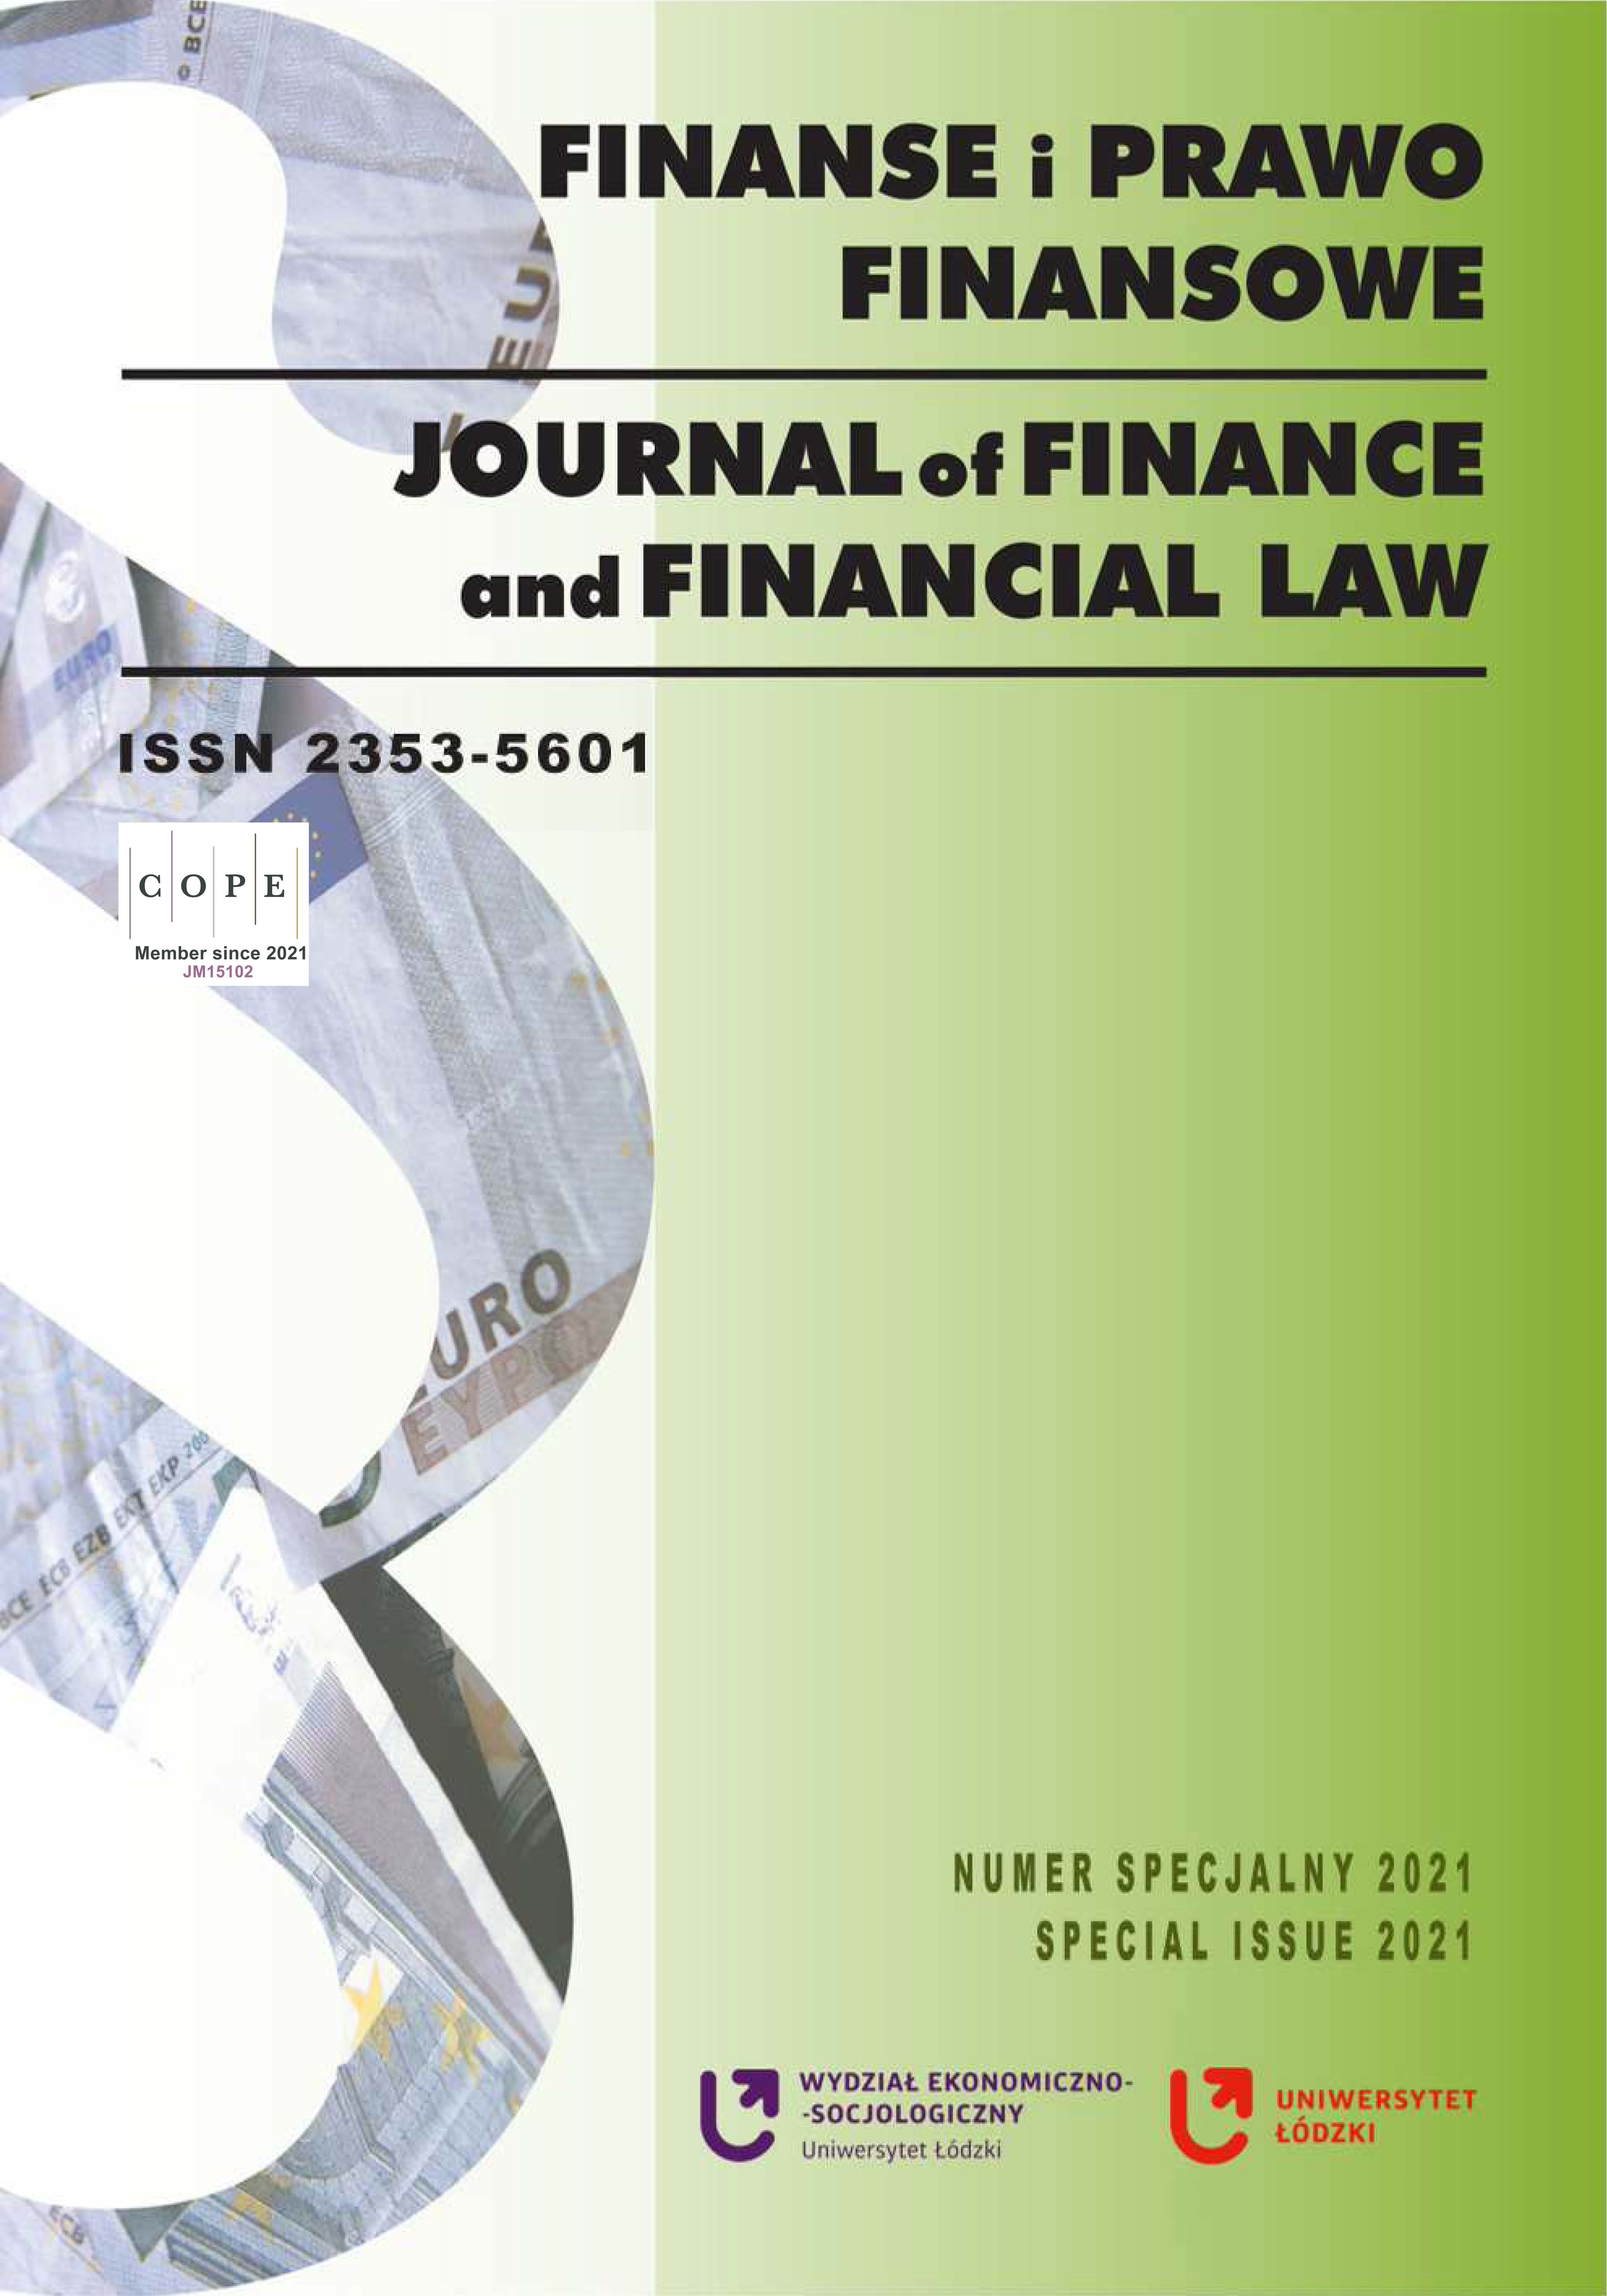 State Policy of Consumer Protection in the Digital Financial Services Market in Ukraine